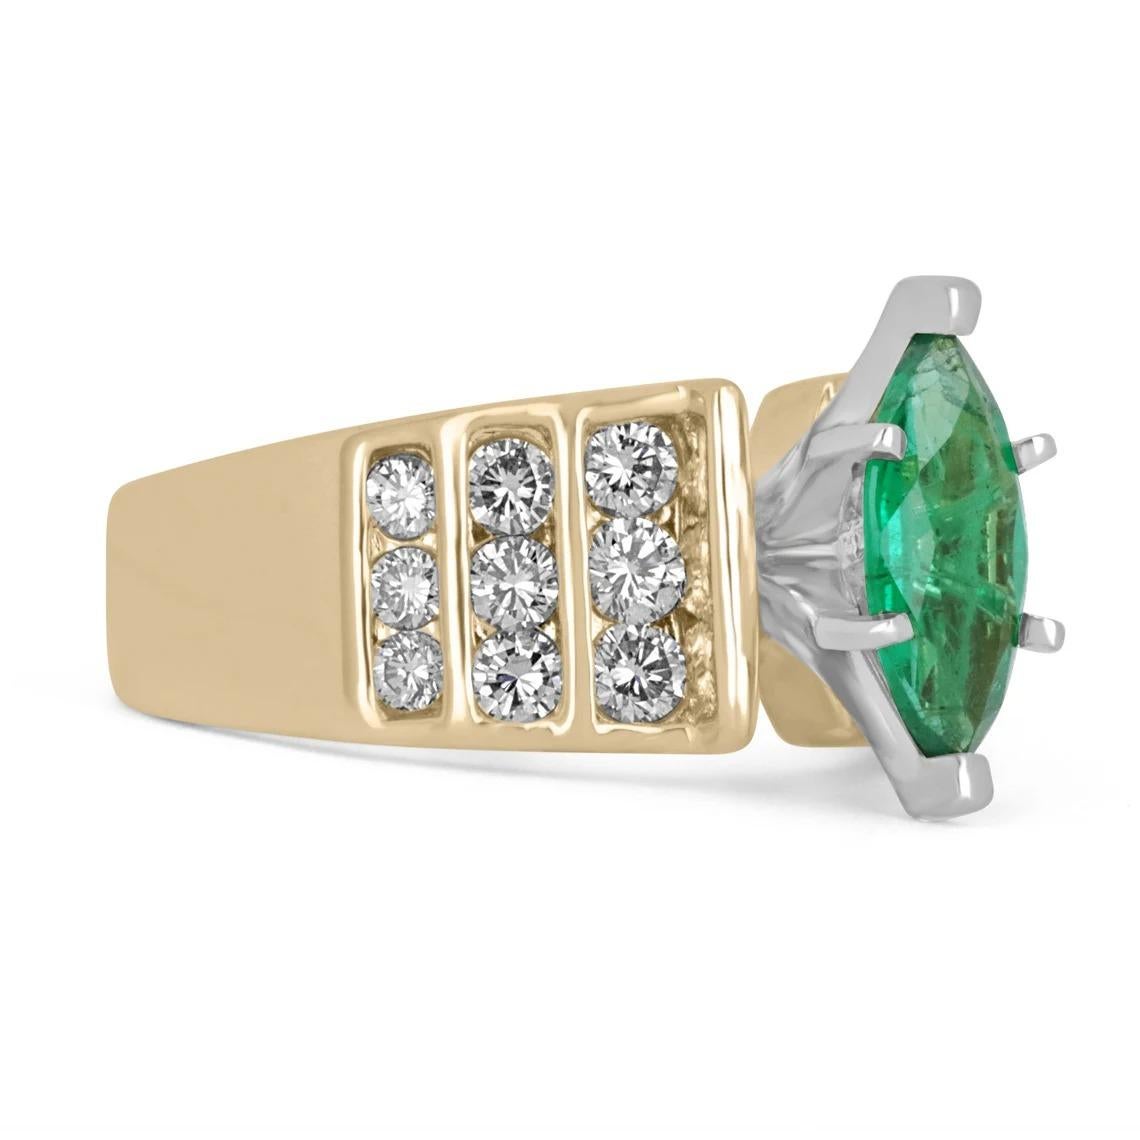 Displayed is a stunning emerald marquise and diamond ring. The center gemstone is an emerald marquise handset in a six-prong setting that allows for a full view of the emerald. Brilliant round diamonds are channel set on the shank of the ring and